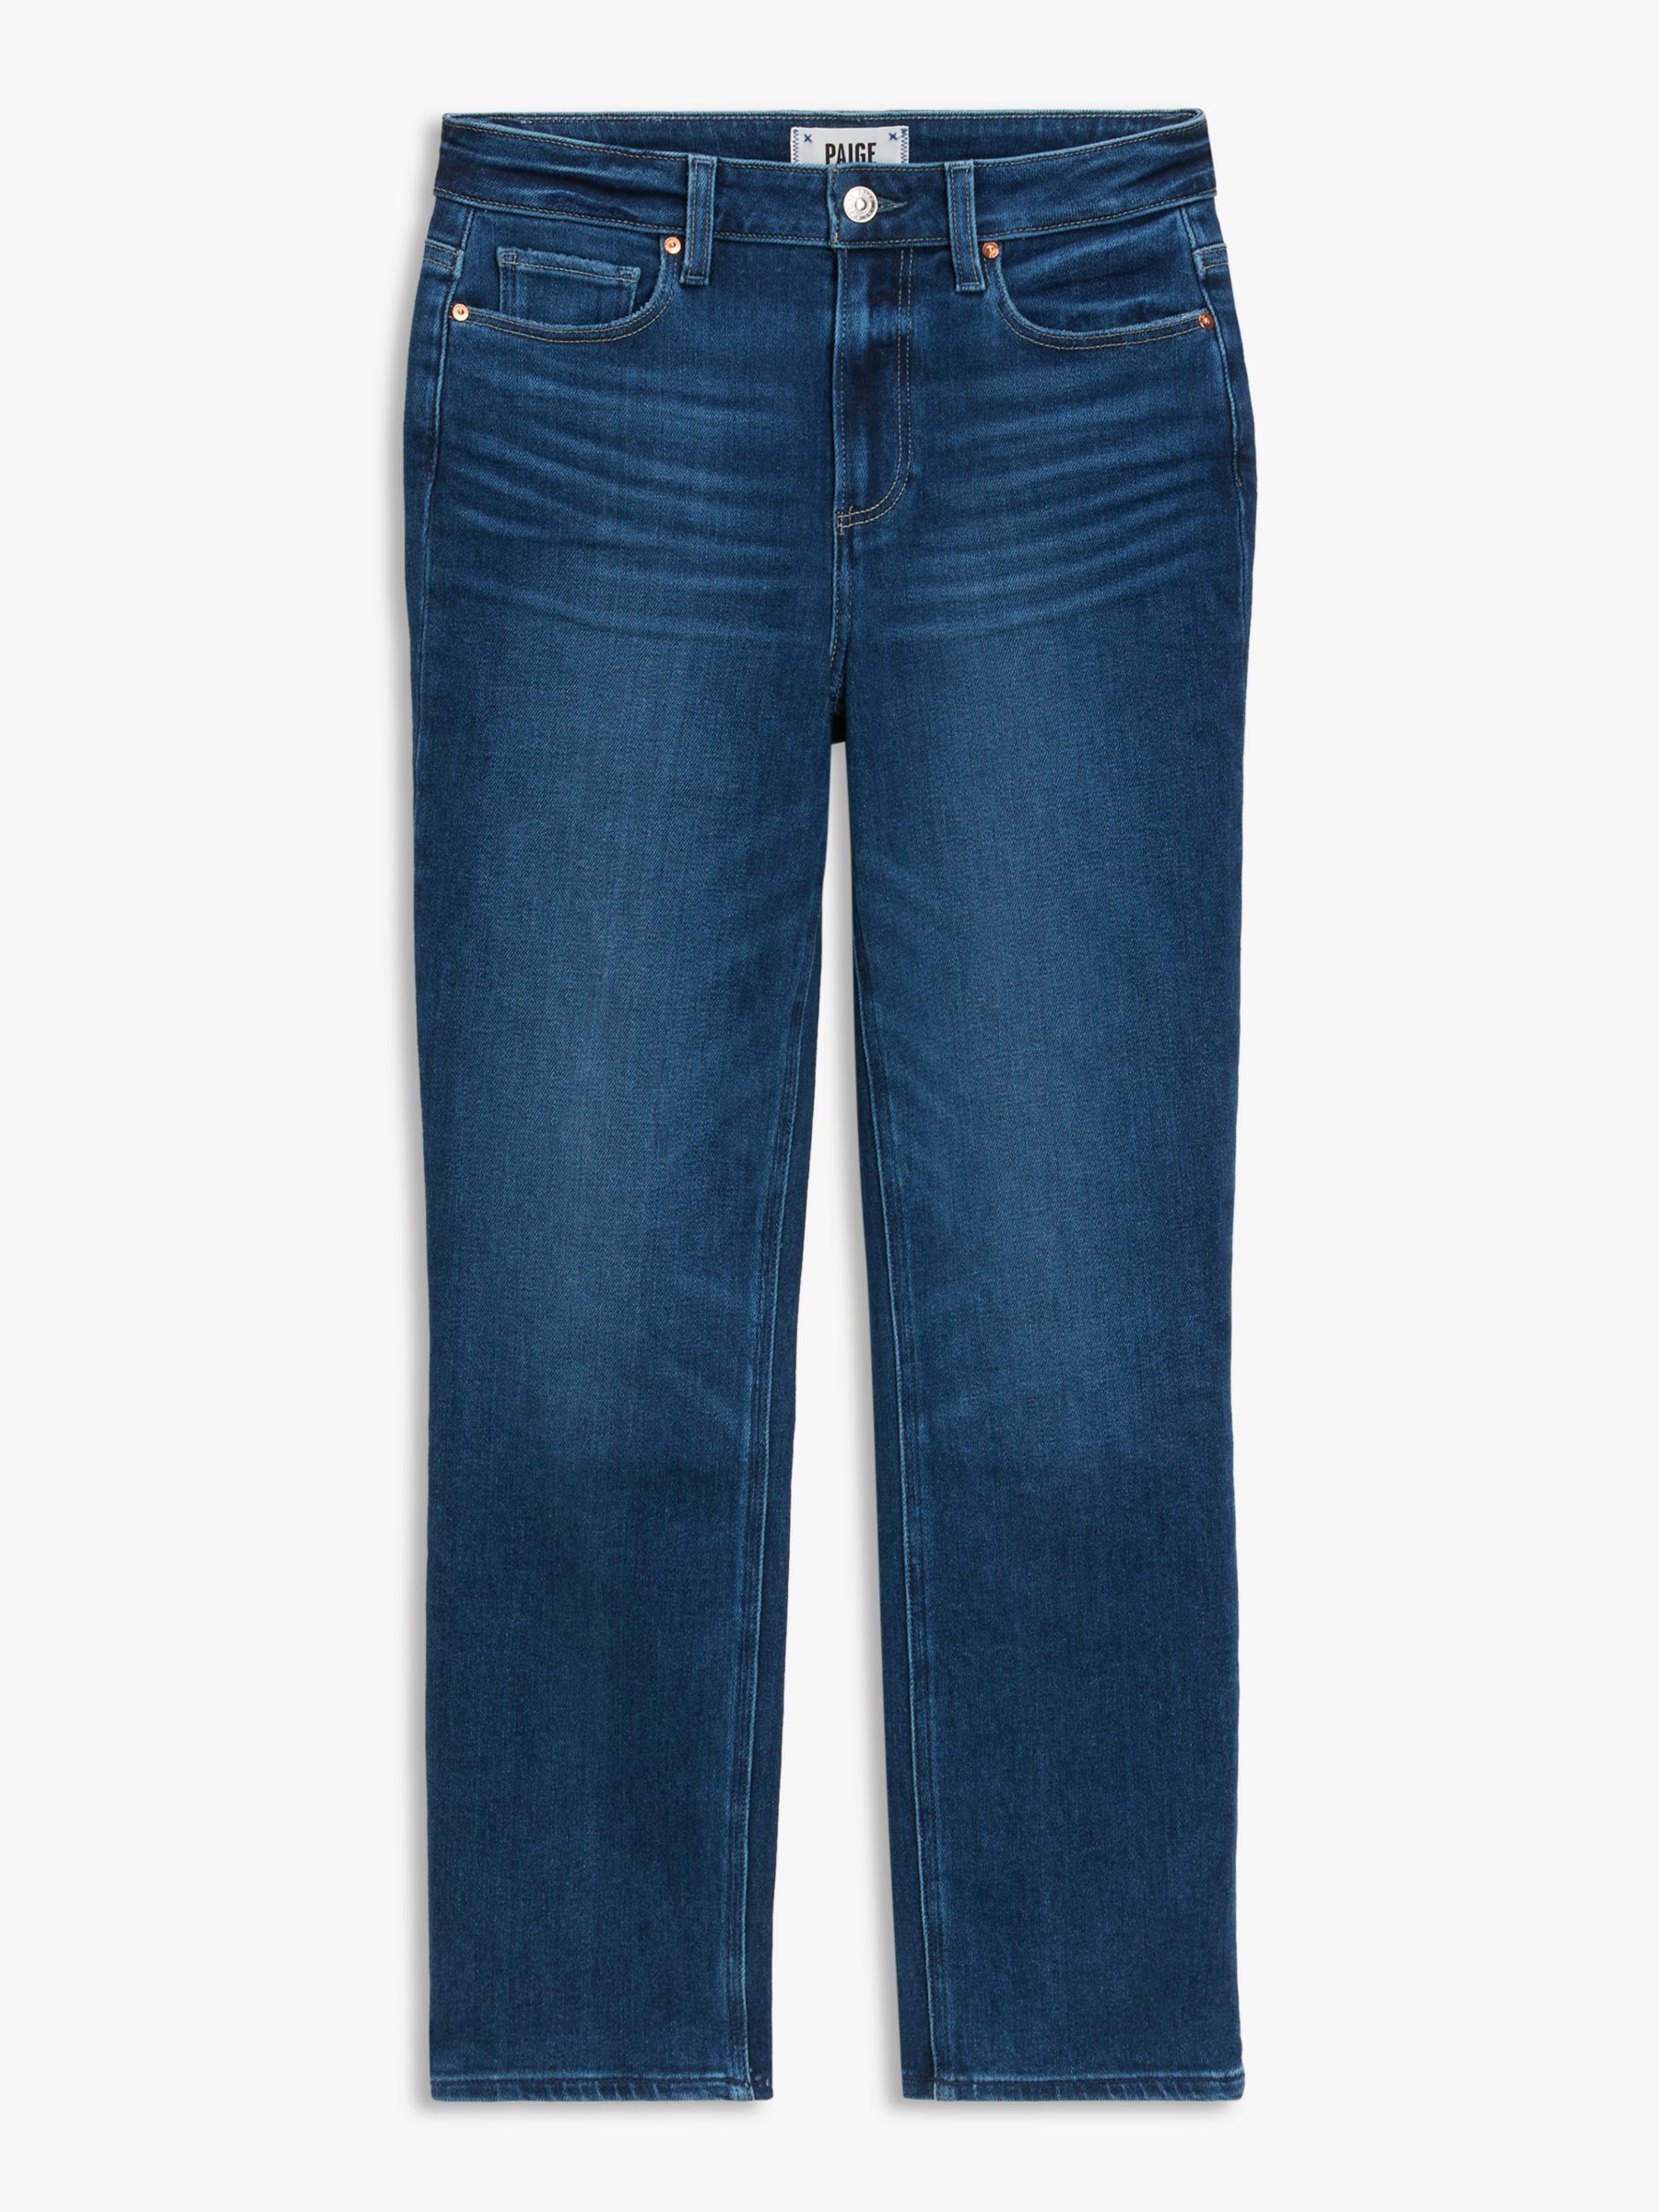 PAIGE Cindy Cropped Jeans, Soleil, 24